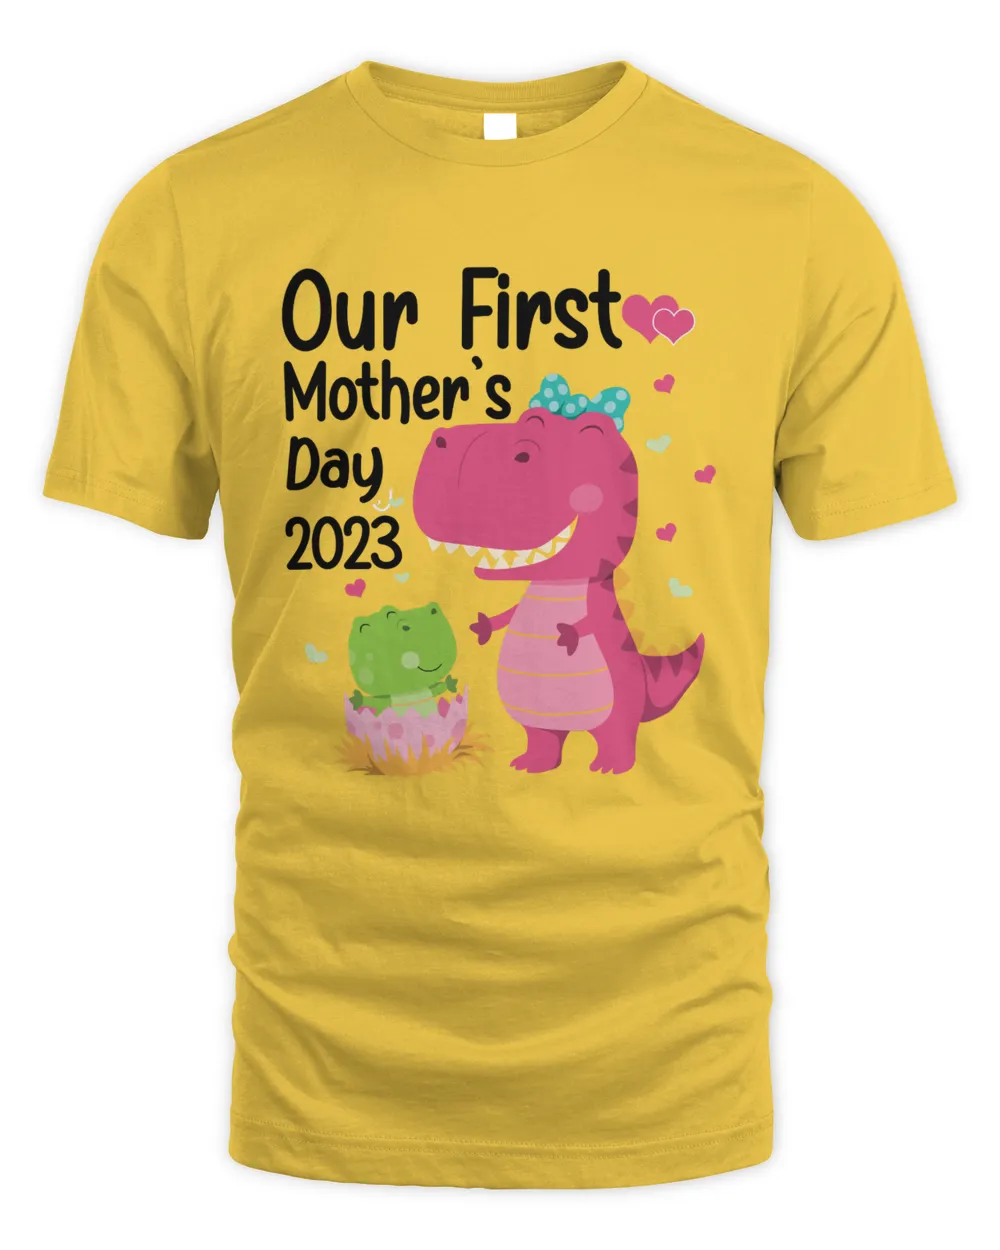 Our First Mothers Day 2023 Shirt